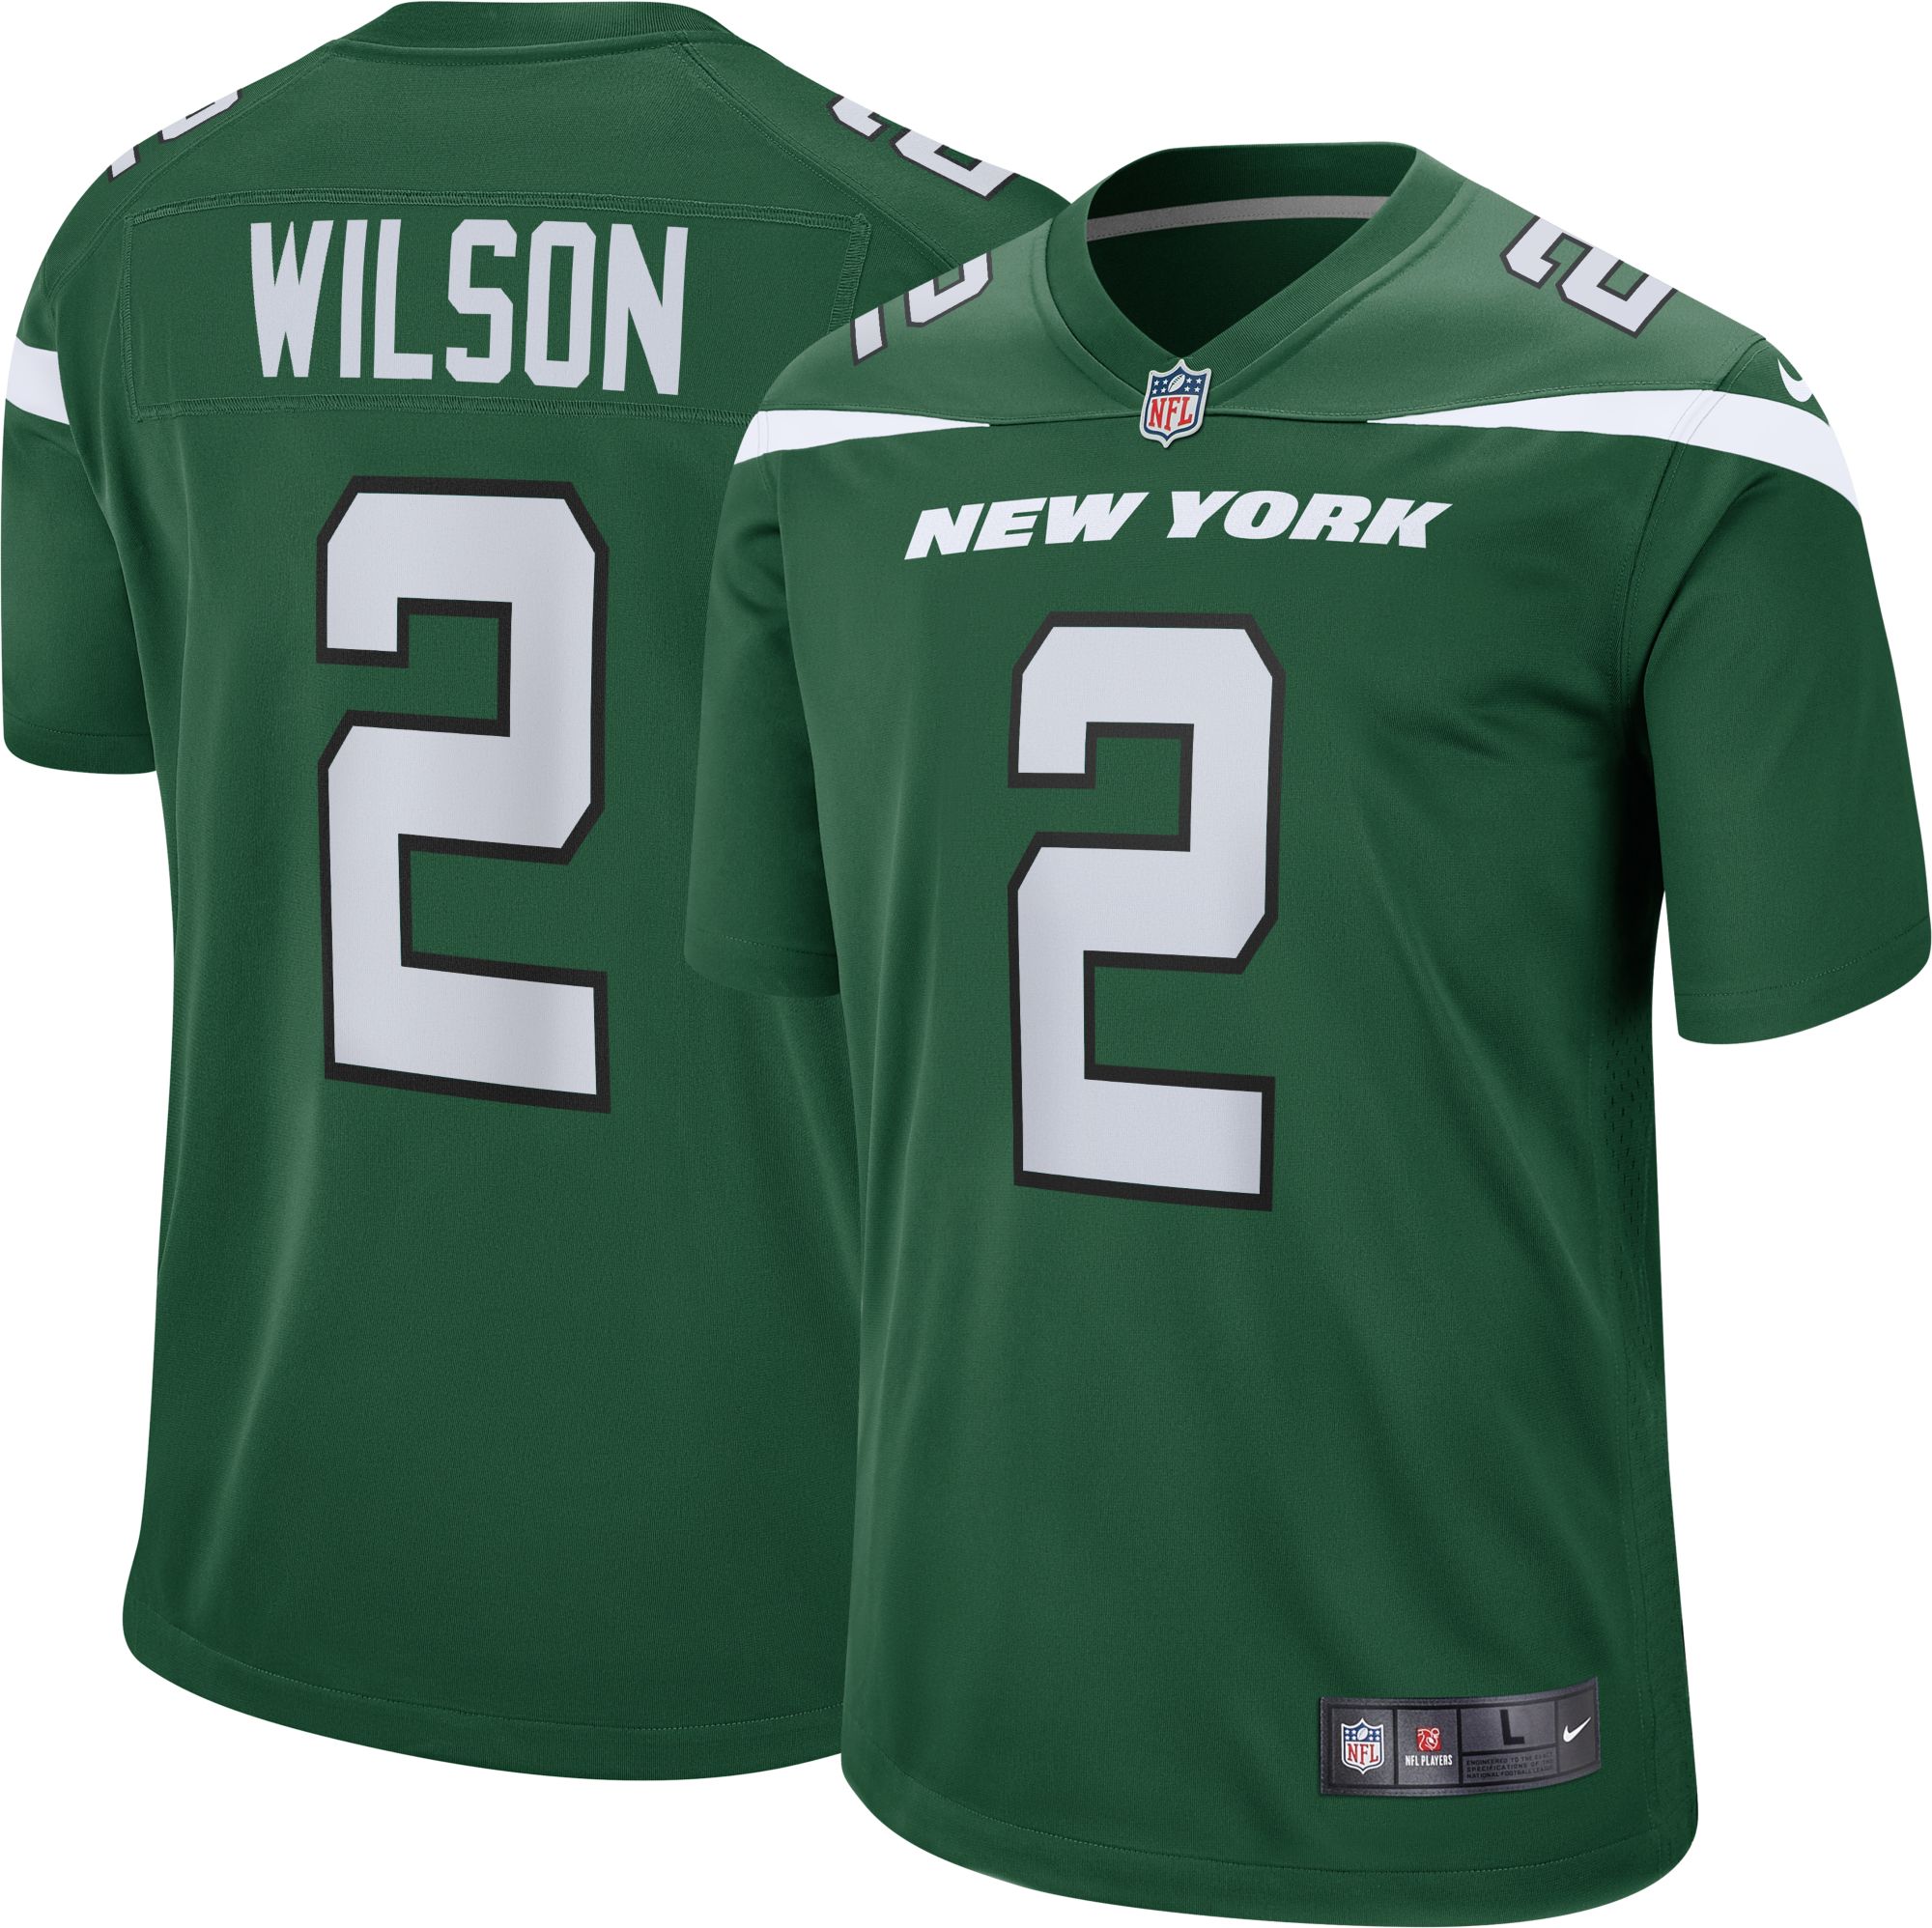 Ahmad Sauce Gardner New York Jets Jersey – Jerseys and Sneakers